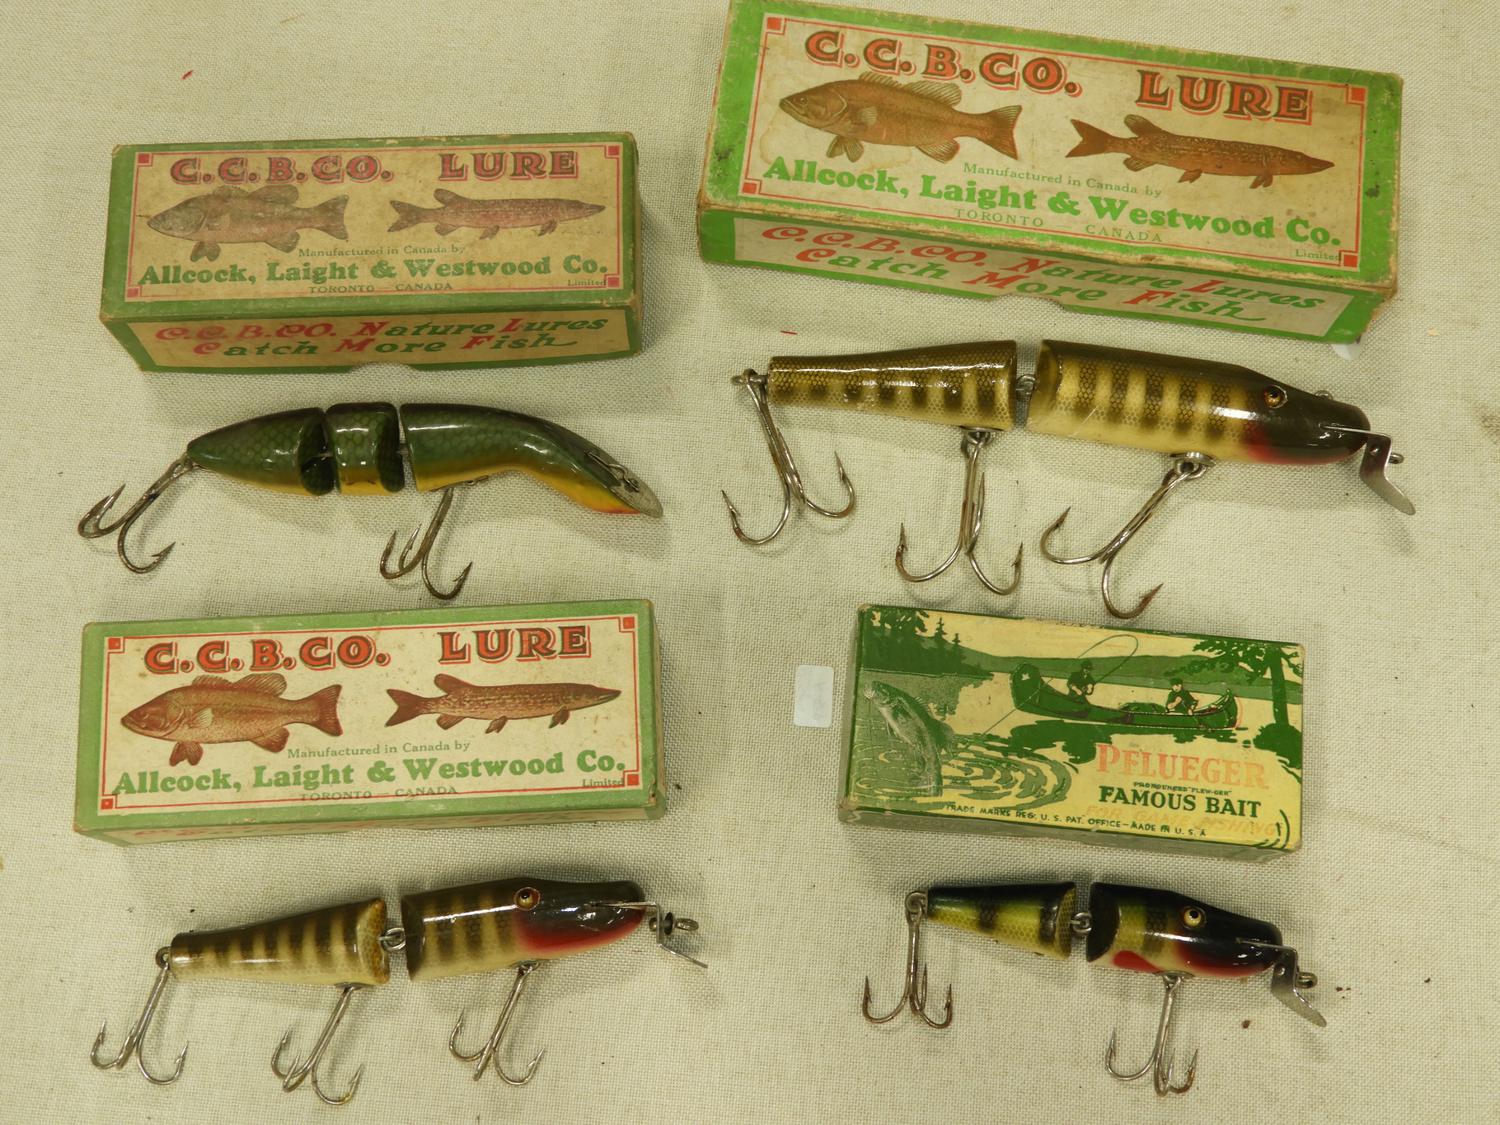 Murrays Auctioneers - Lot 266: Four vintage jointed fishing lures